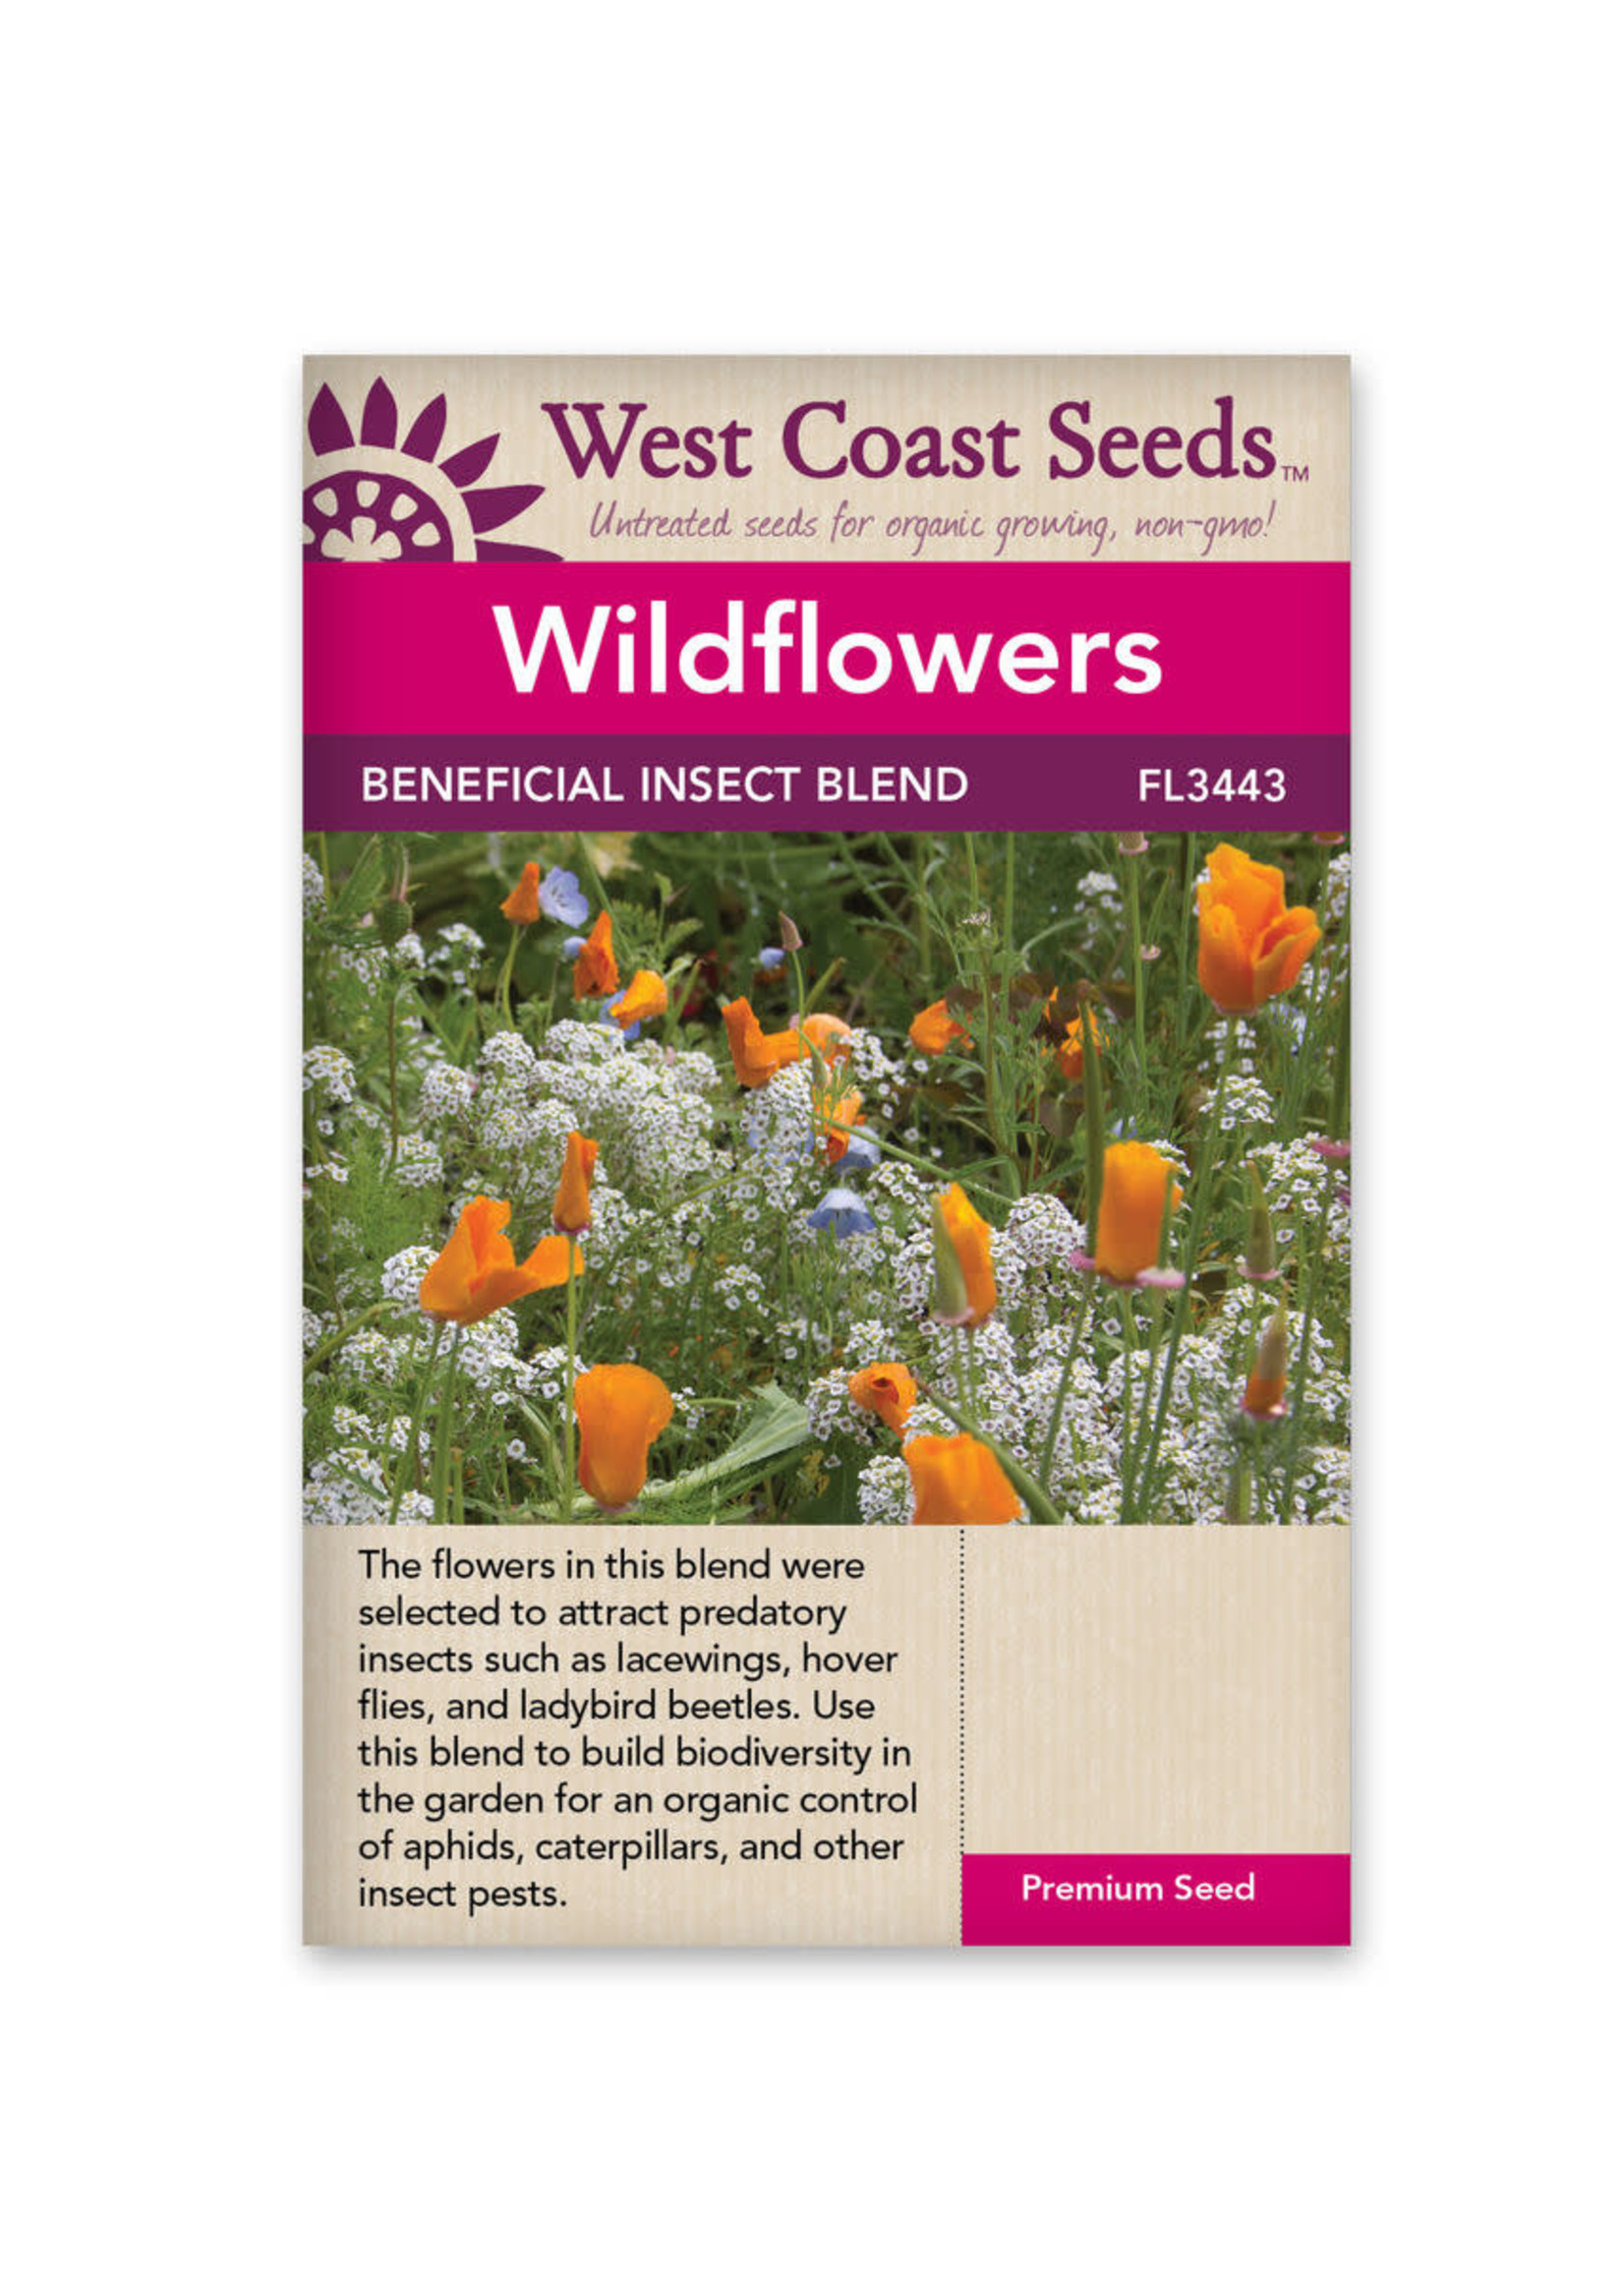 West Coast Seeds Beneficial Insect Blend